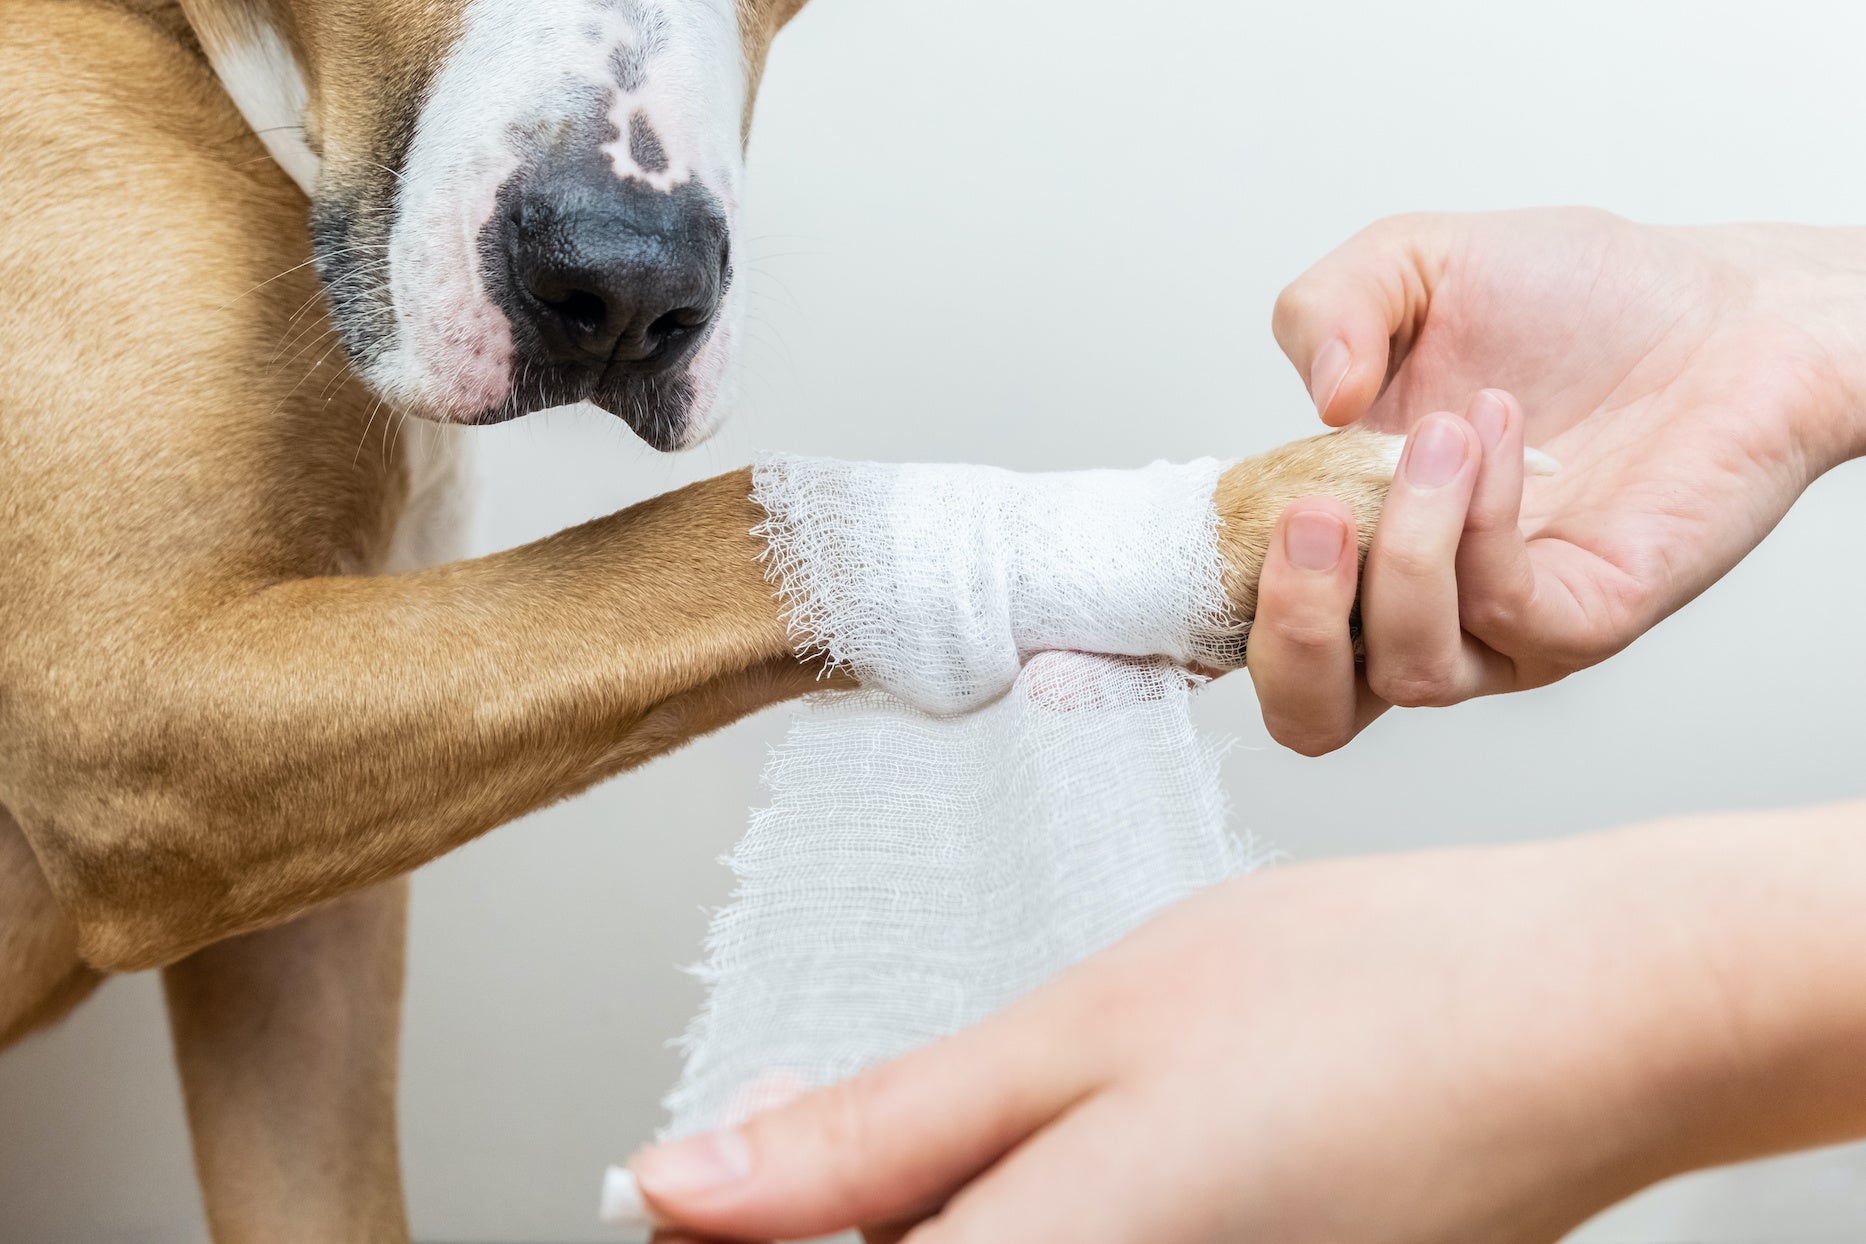 Dog receiving first aid - Dr. Dobias Healing Solutions